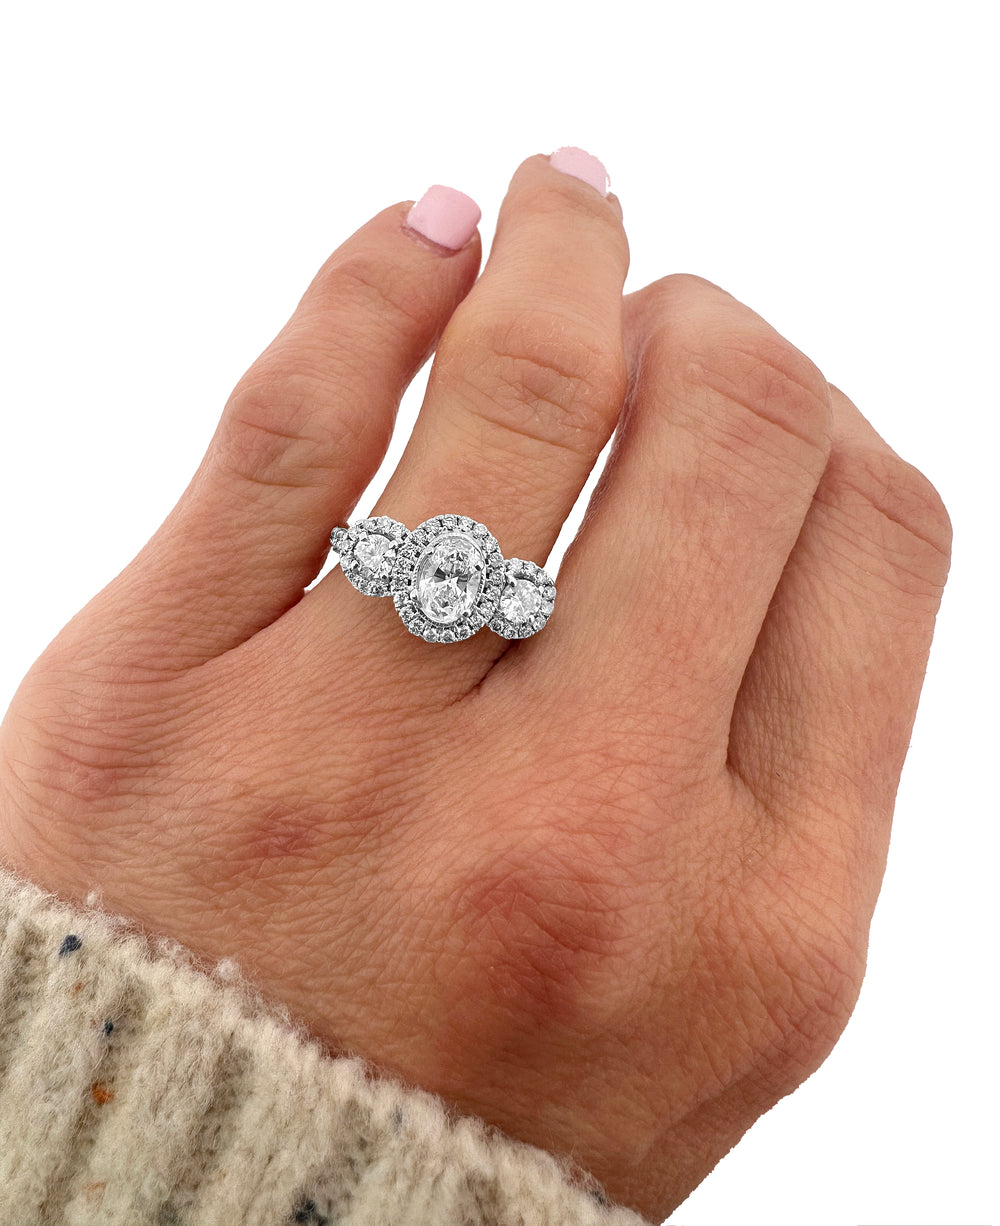 1.16ctw 3-stone Oval and Round Halo Engagement Ring in 14k White Gold, on hand